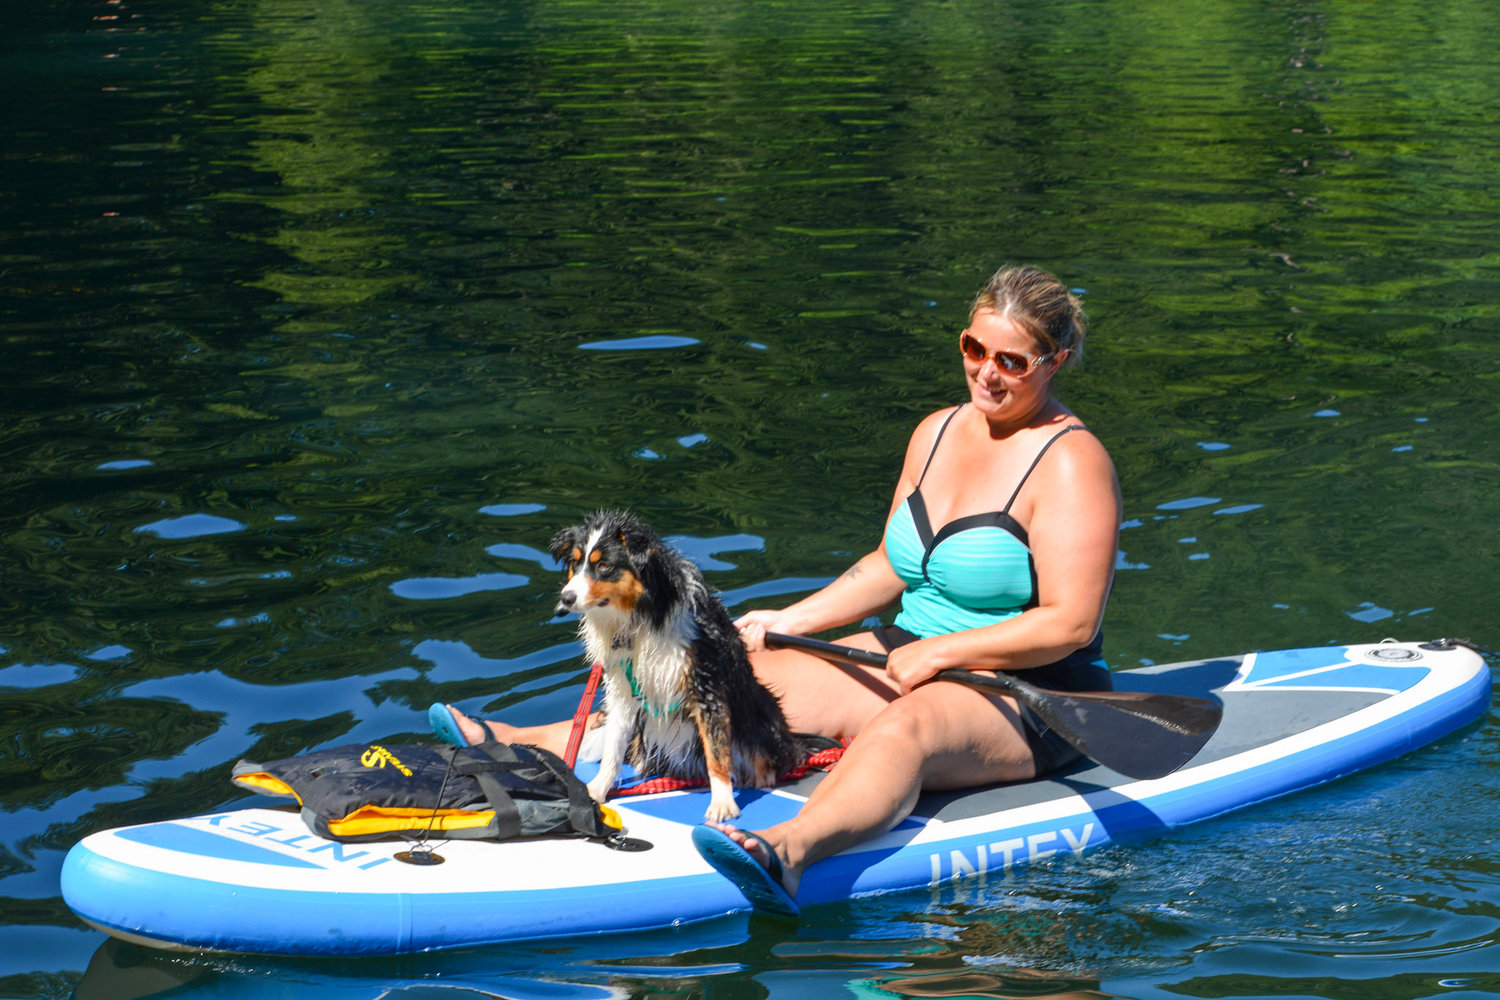 One paddleboarder brought along her dog to beat the heat on June 26 at Battle Ground Lake State Park.